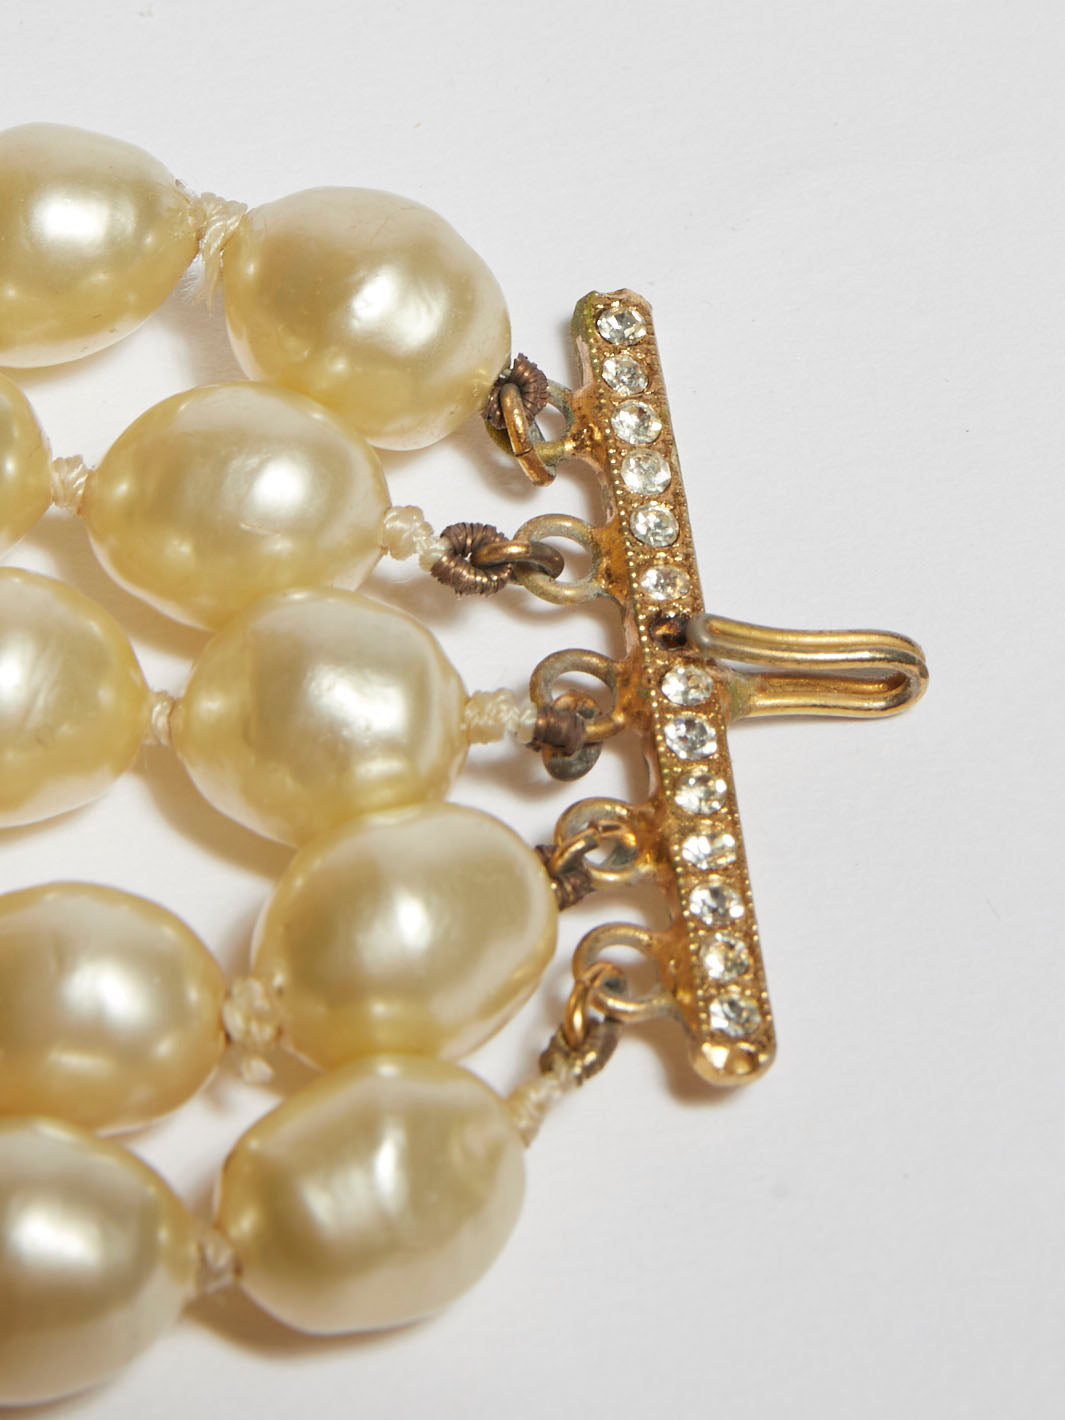 1980s Vintagel Baroque bracelet made of five rows of knotted pearls